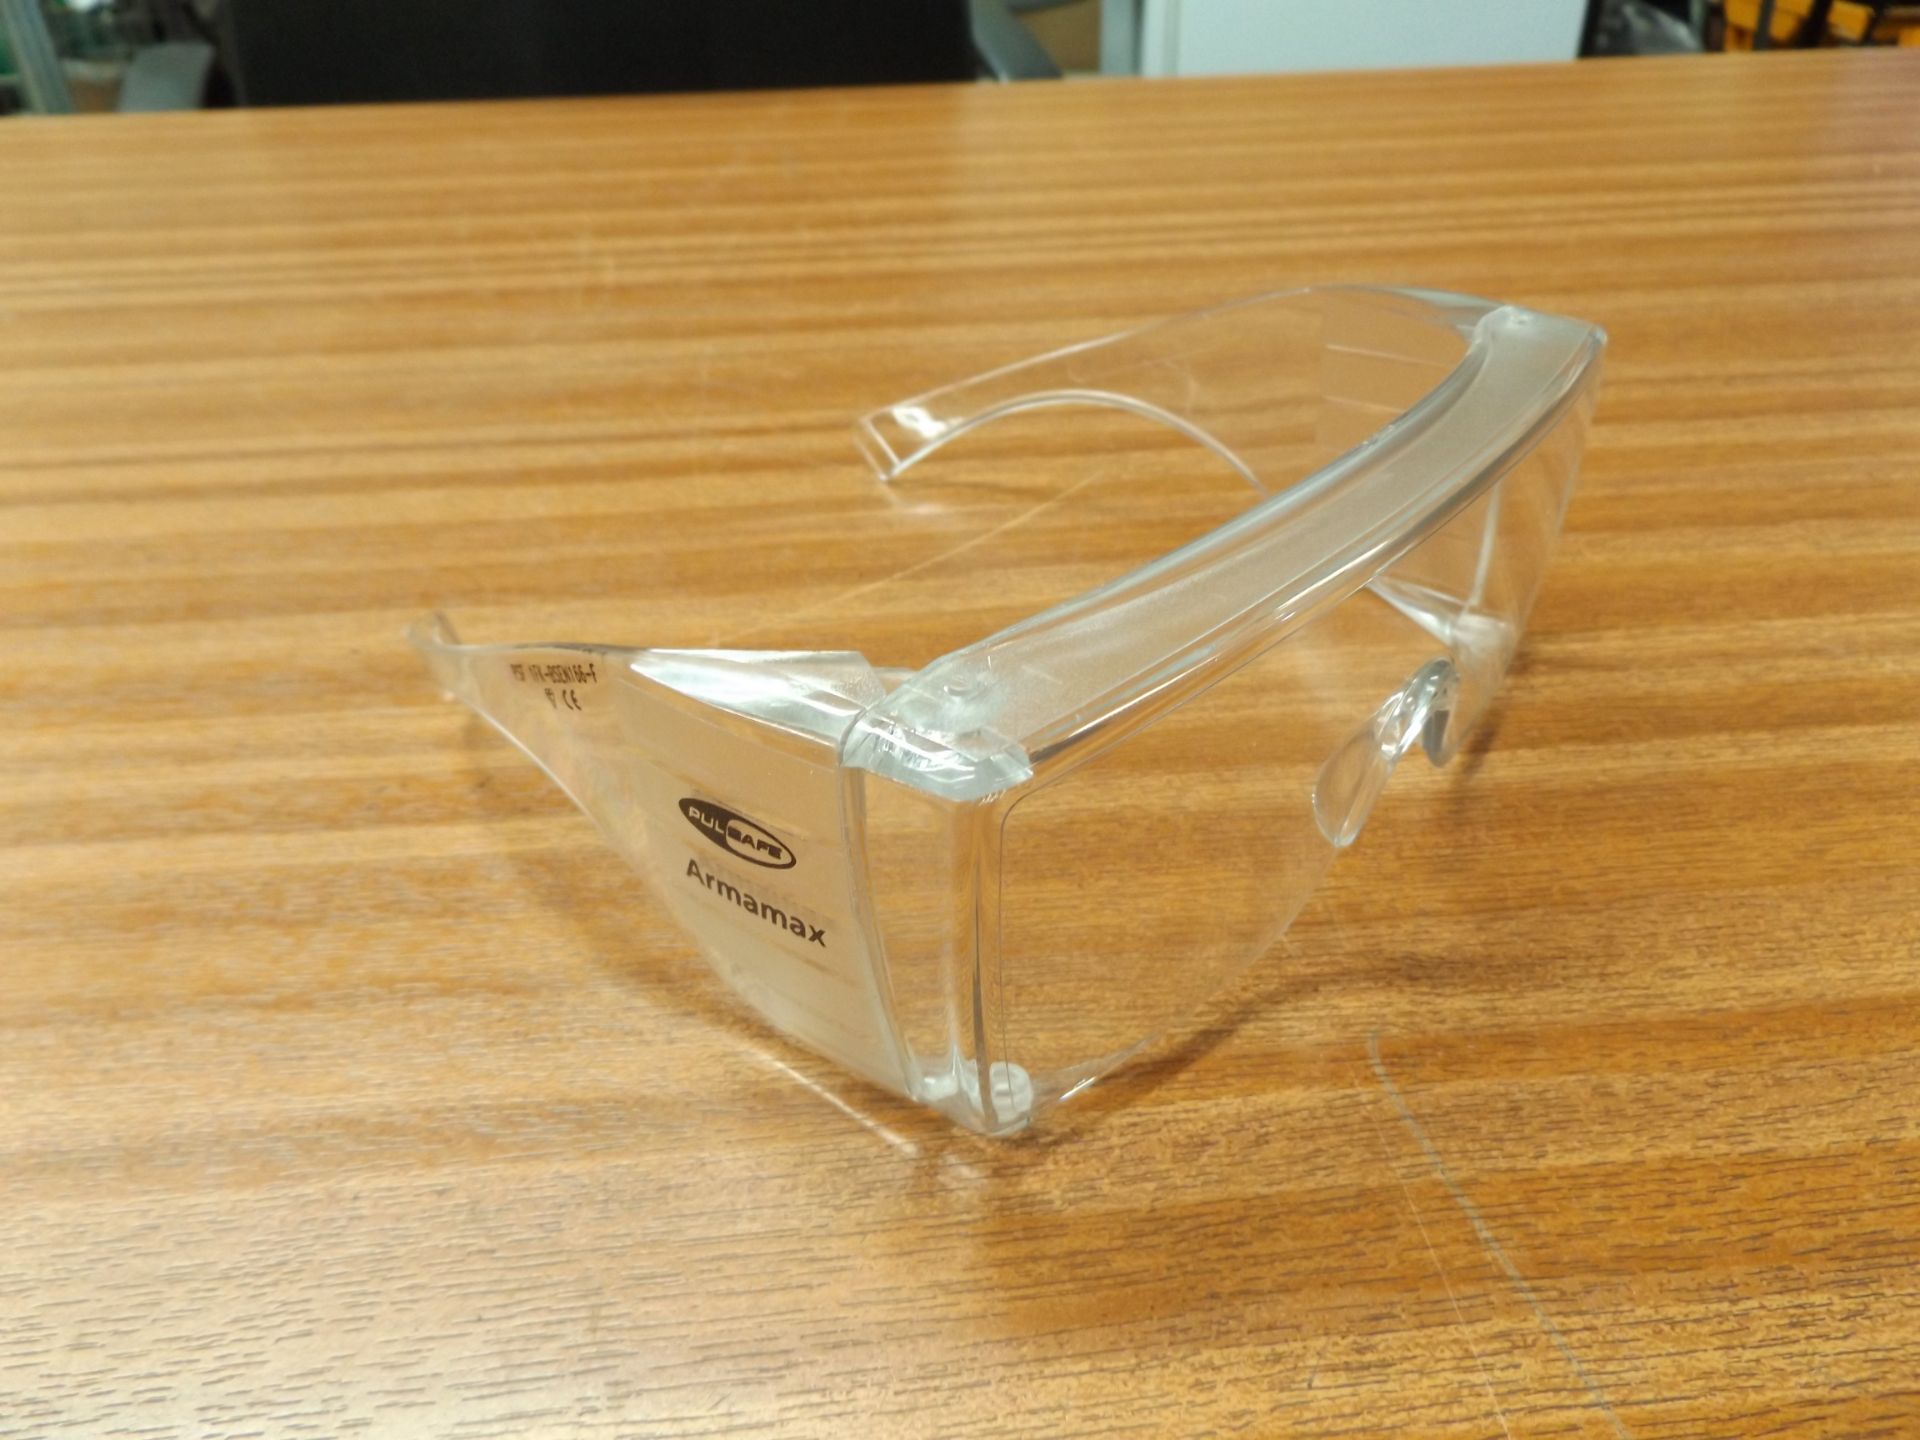 10 x PulSafe Armamax Safety Glasses - Image 2 of 7